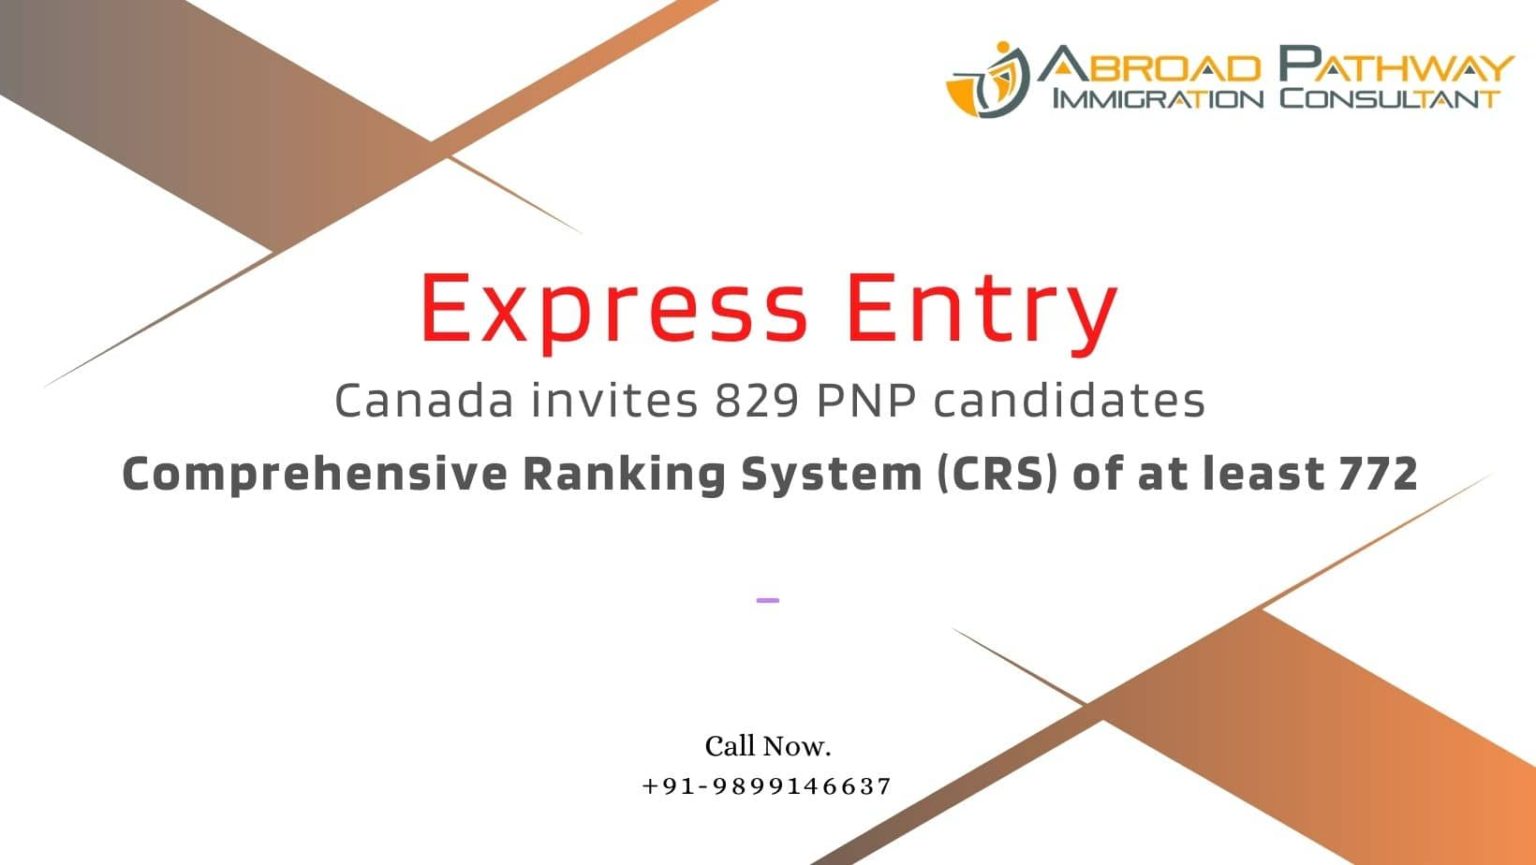 Canada latest Express Entry Draw invites 829 PNP Candidates